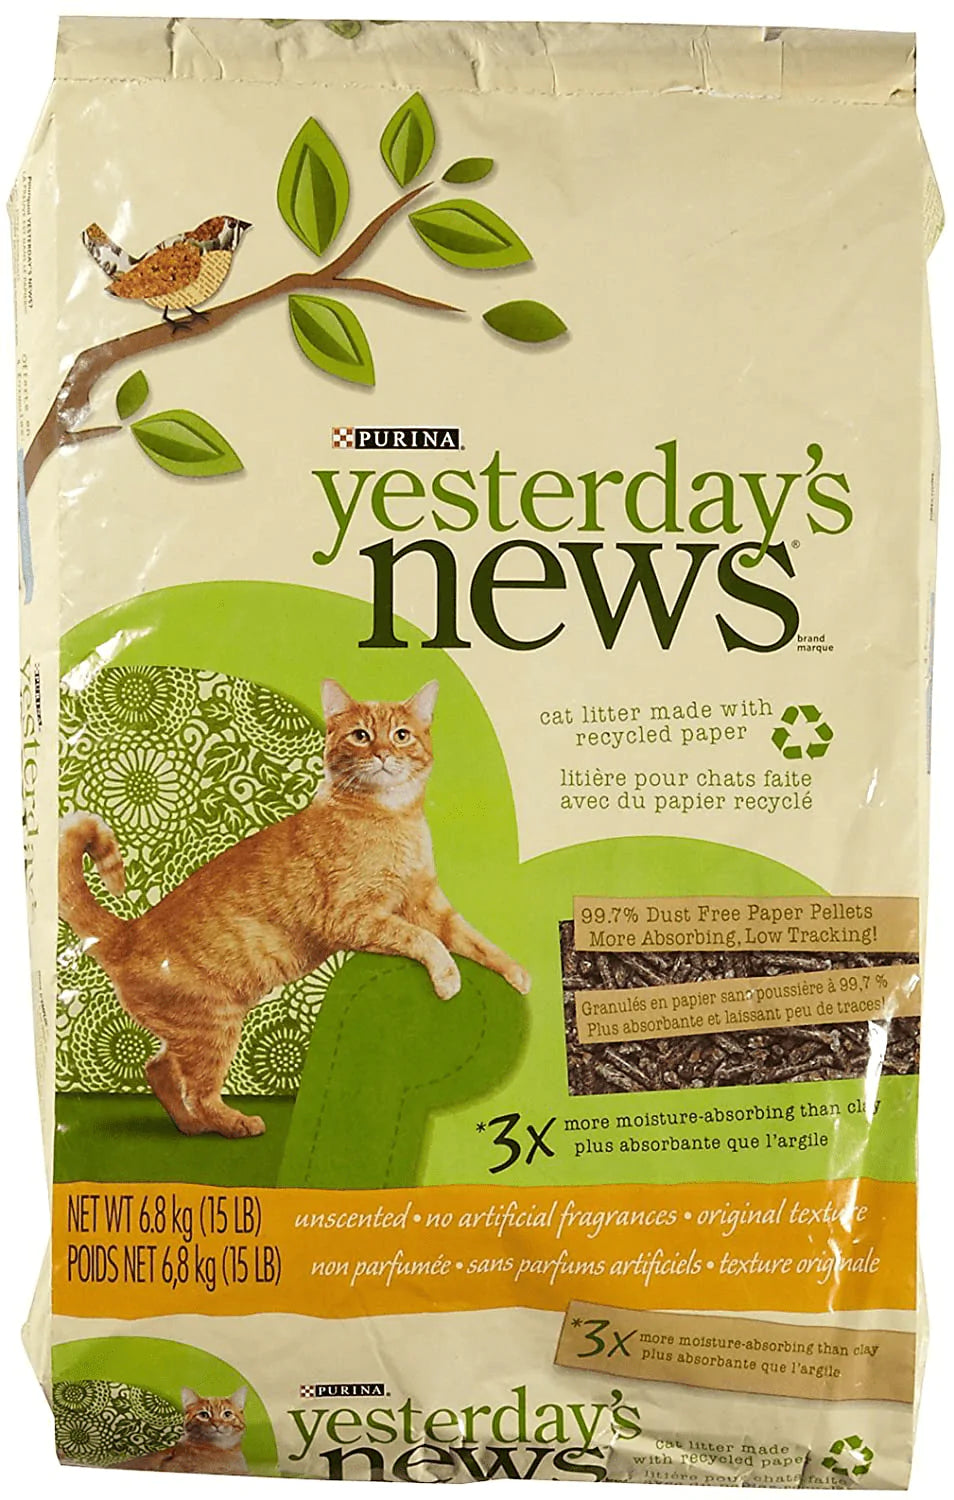 YESTERDAY'S NEWS PRODUCTS 702303 Yesterday'S News Cat Litter, 15-Pound